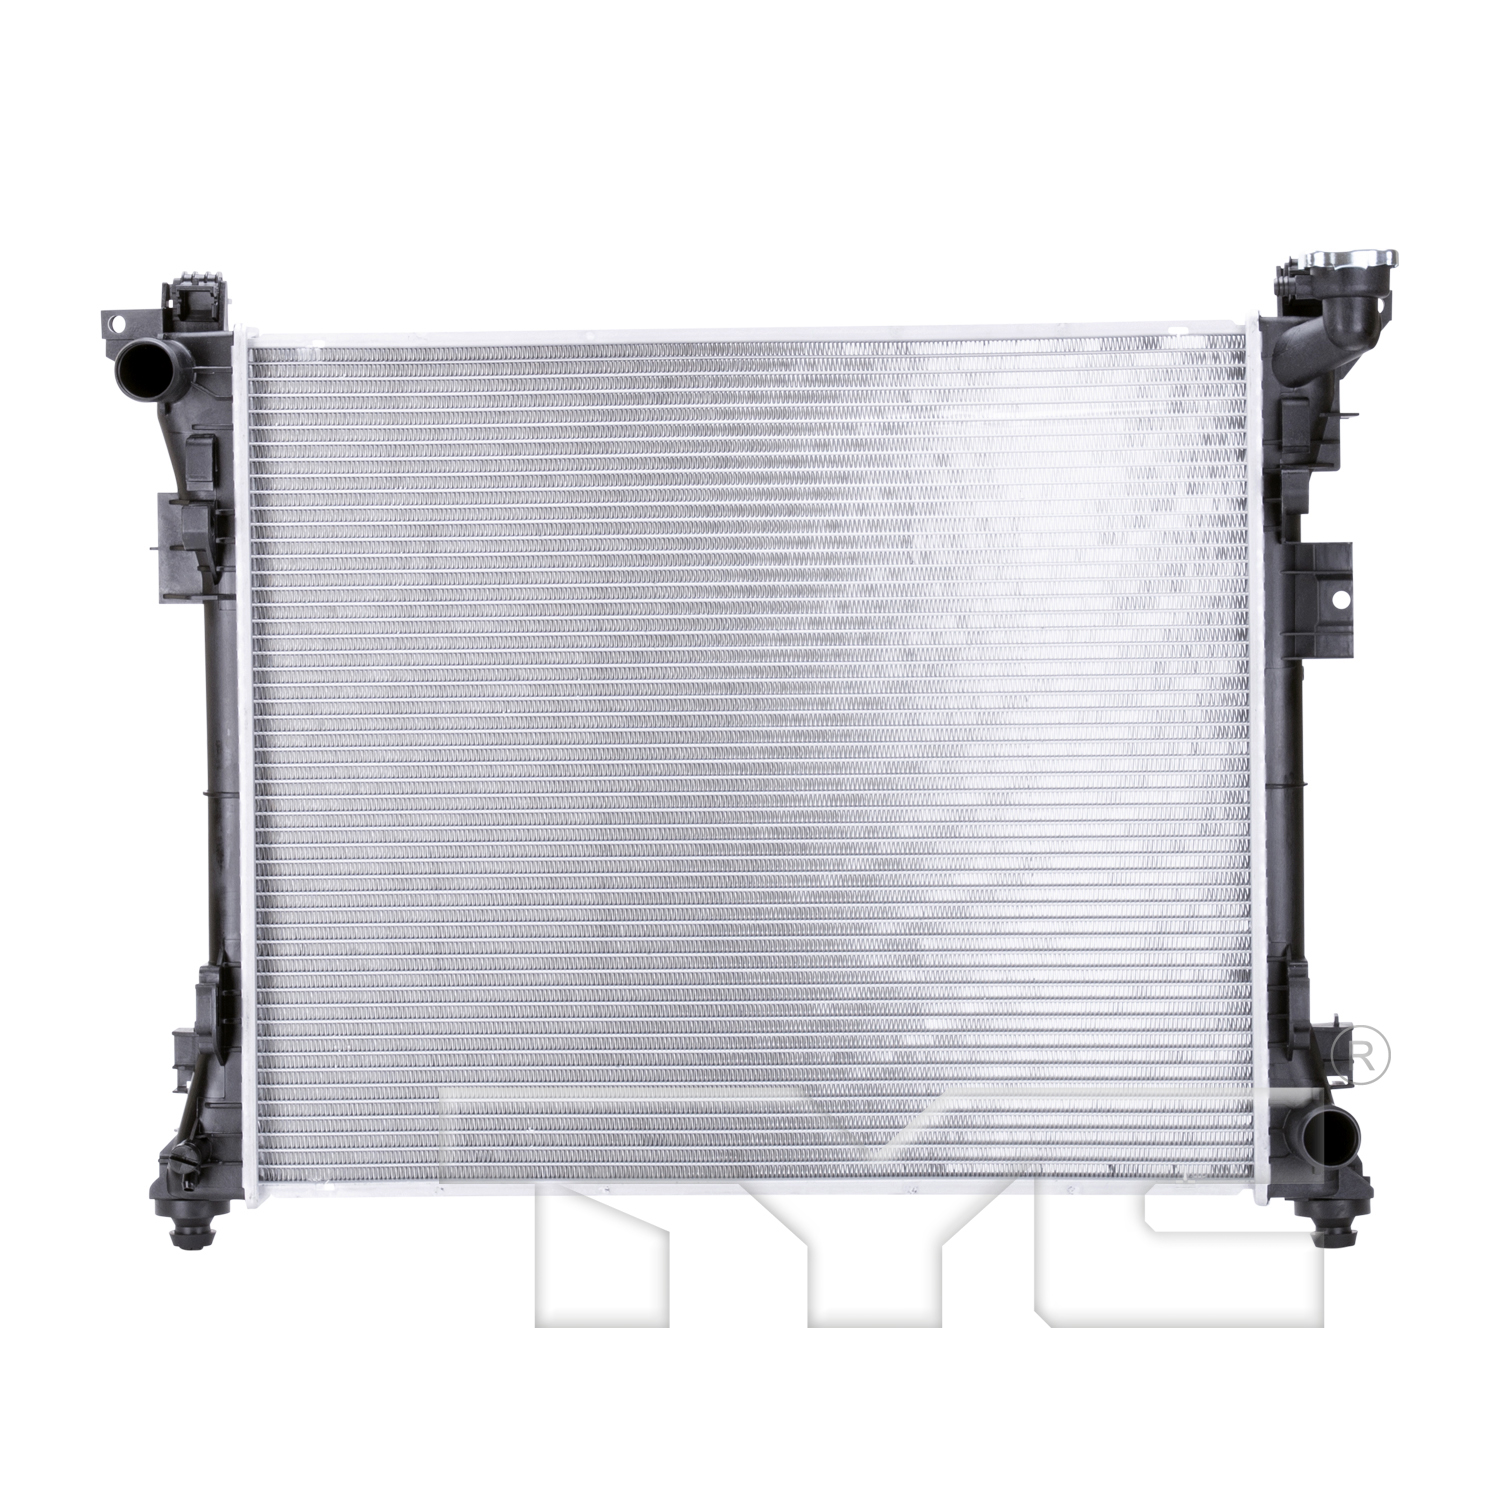 Aftermarket RADIATORS for CHRYSLER - TOWN & COUNTRY, TOWN & COUNTRY,08-10,Radiator assembly